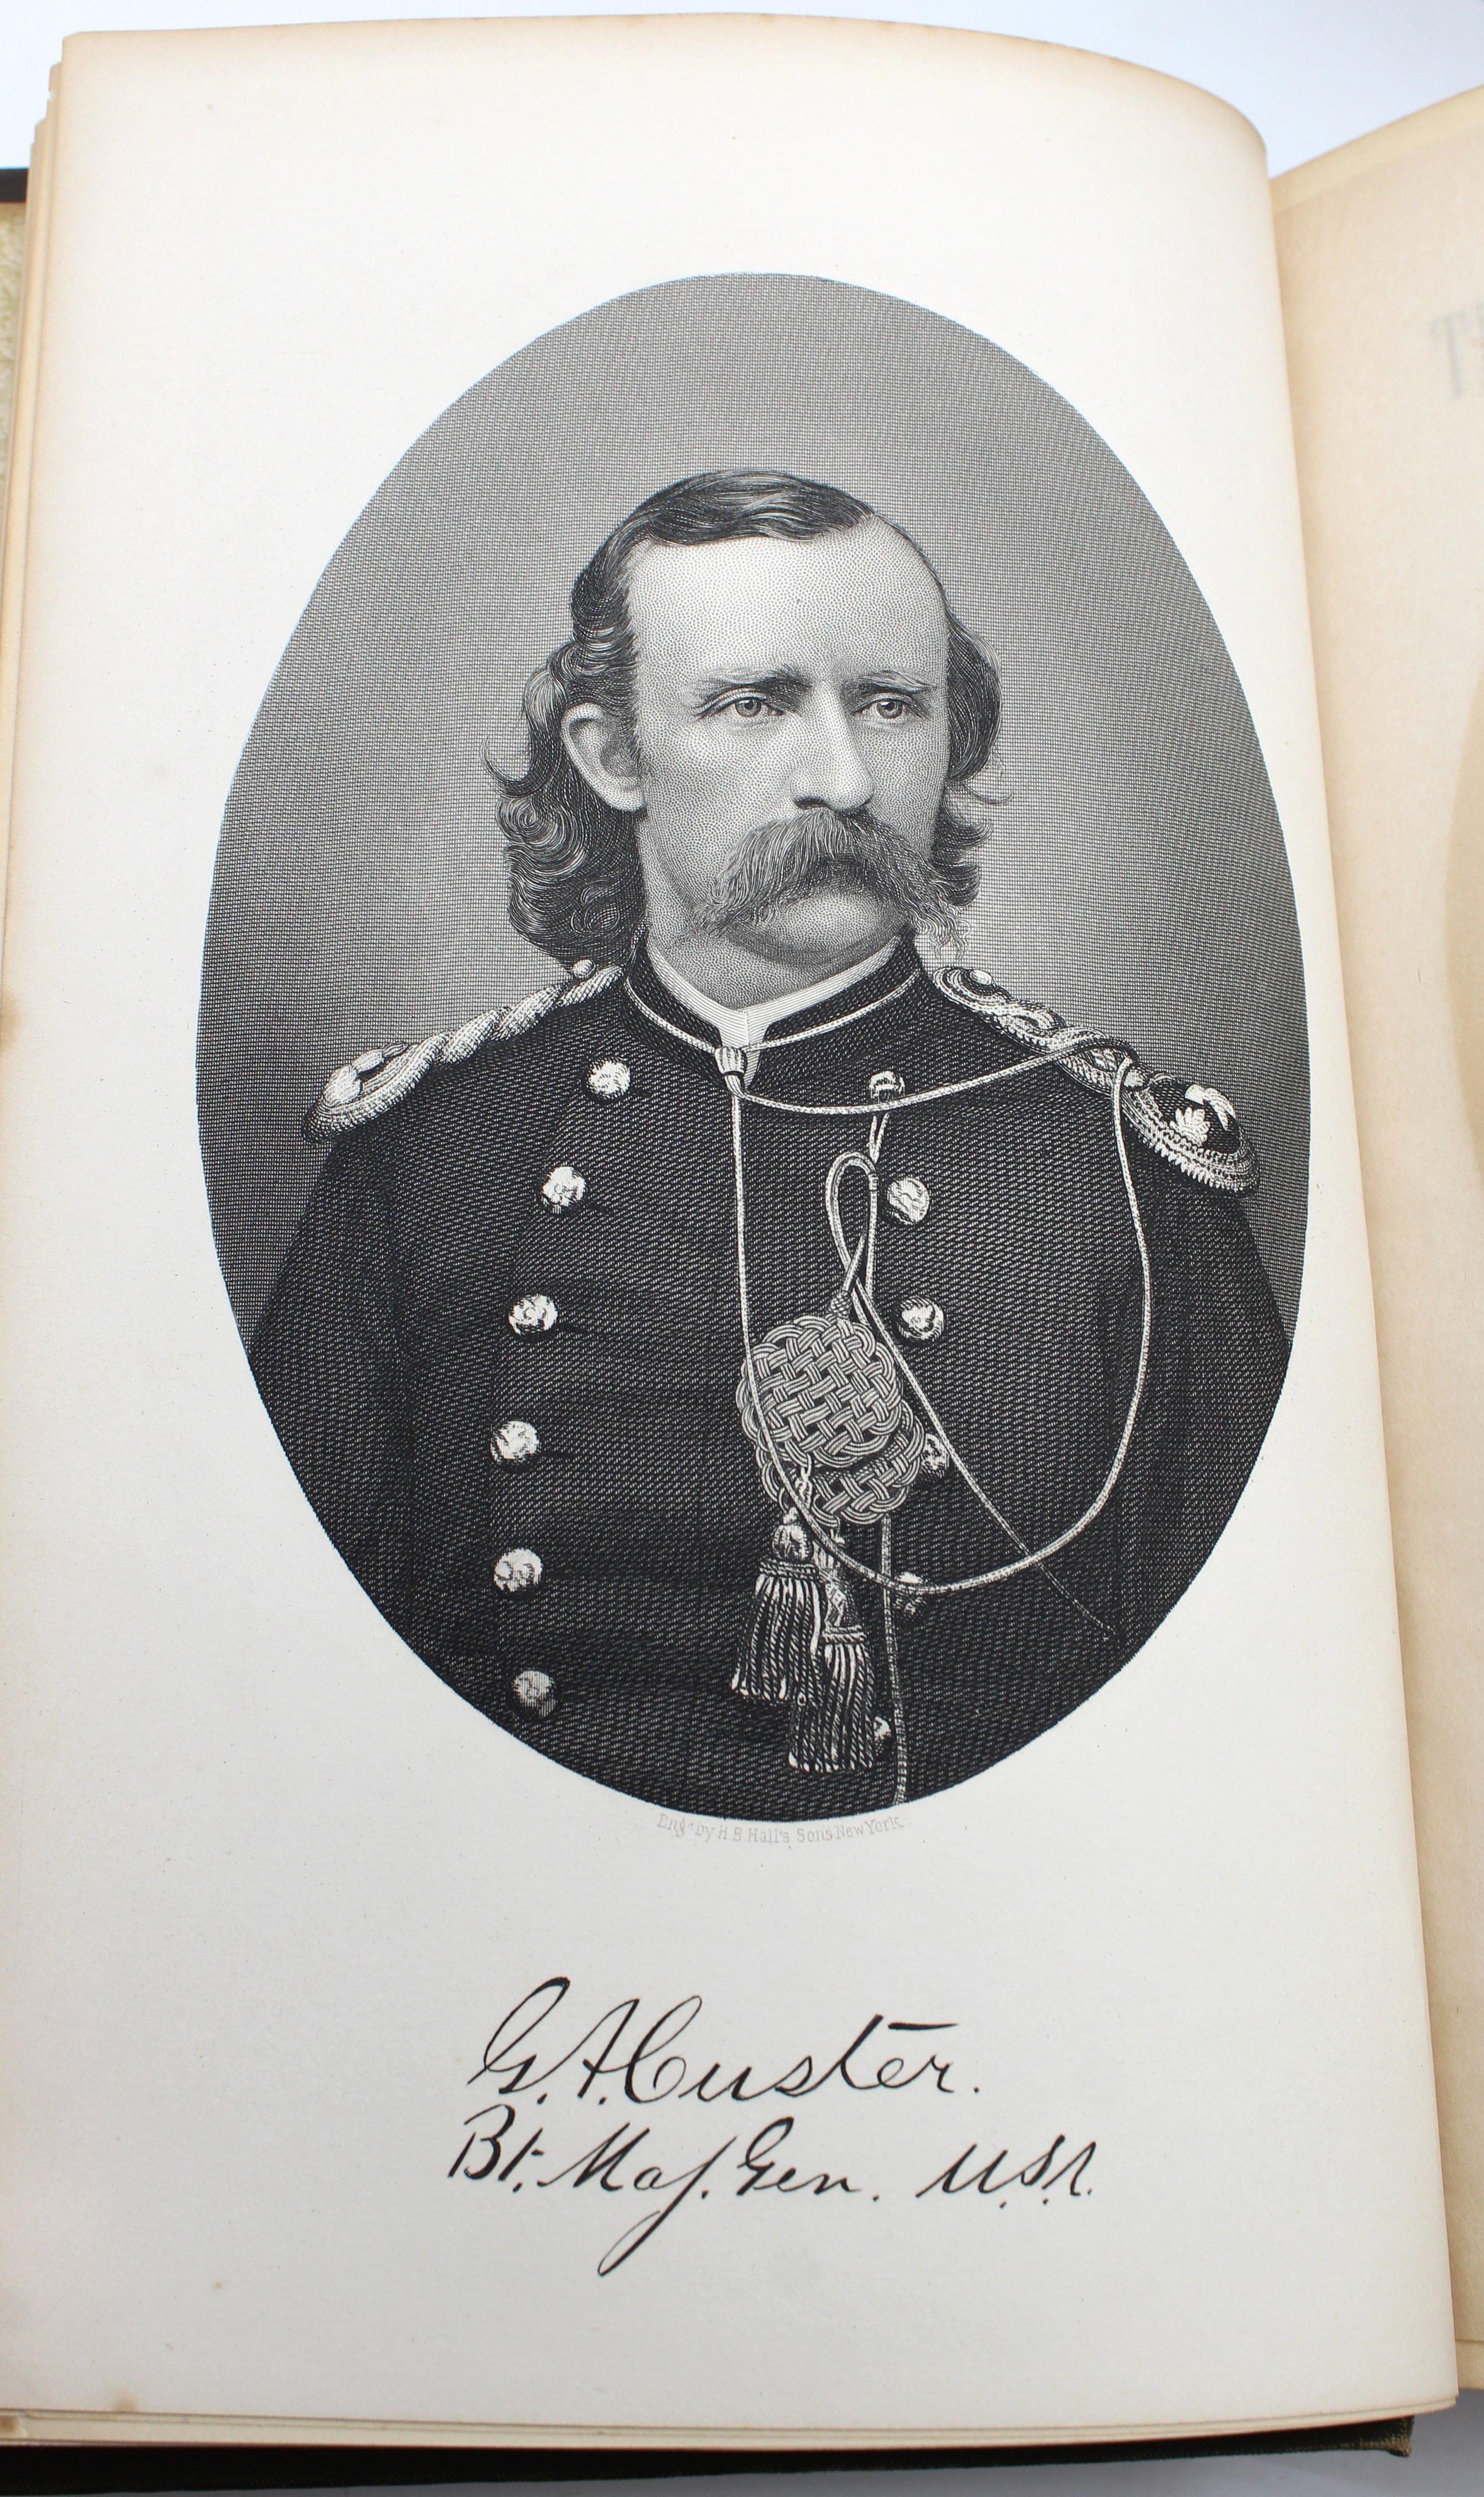 Late 19th Century Tenting on the Plains, or General Custer in Kansas and Texas, by E. B. Custer